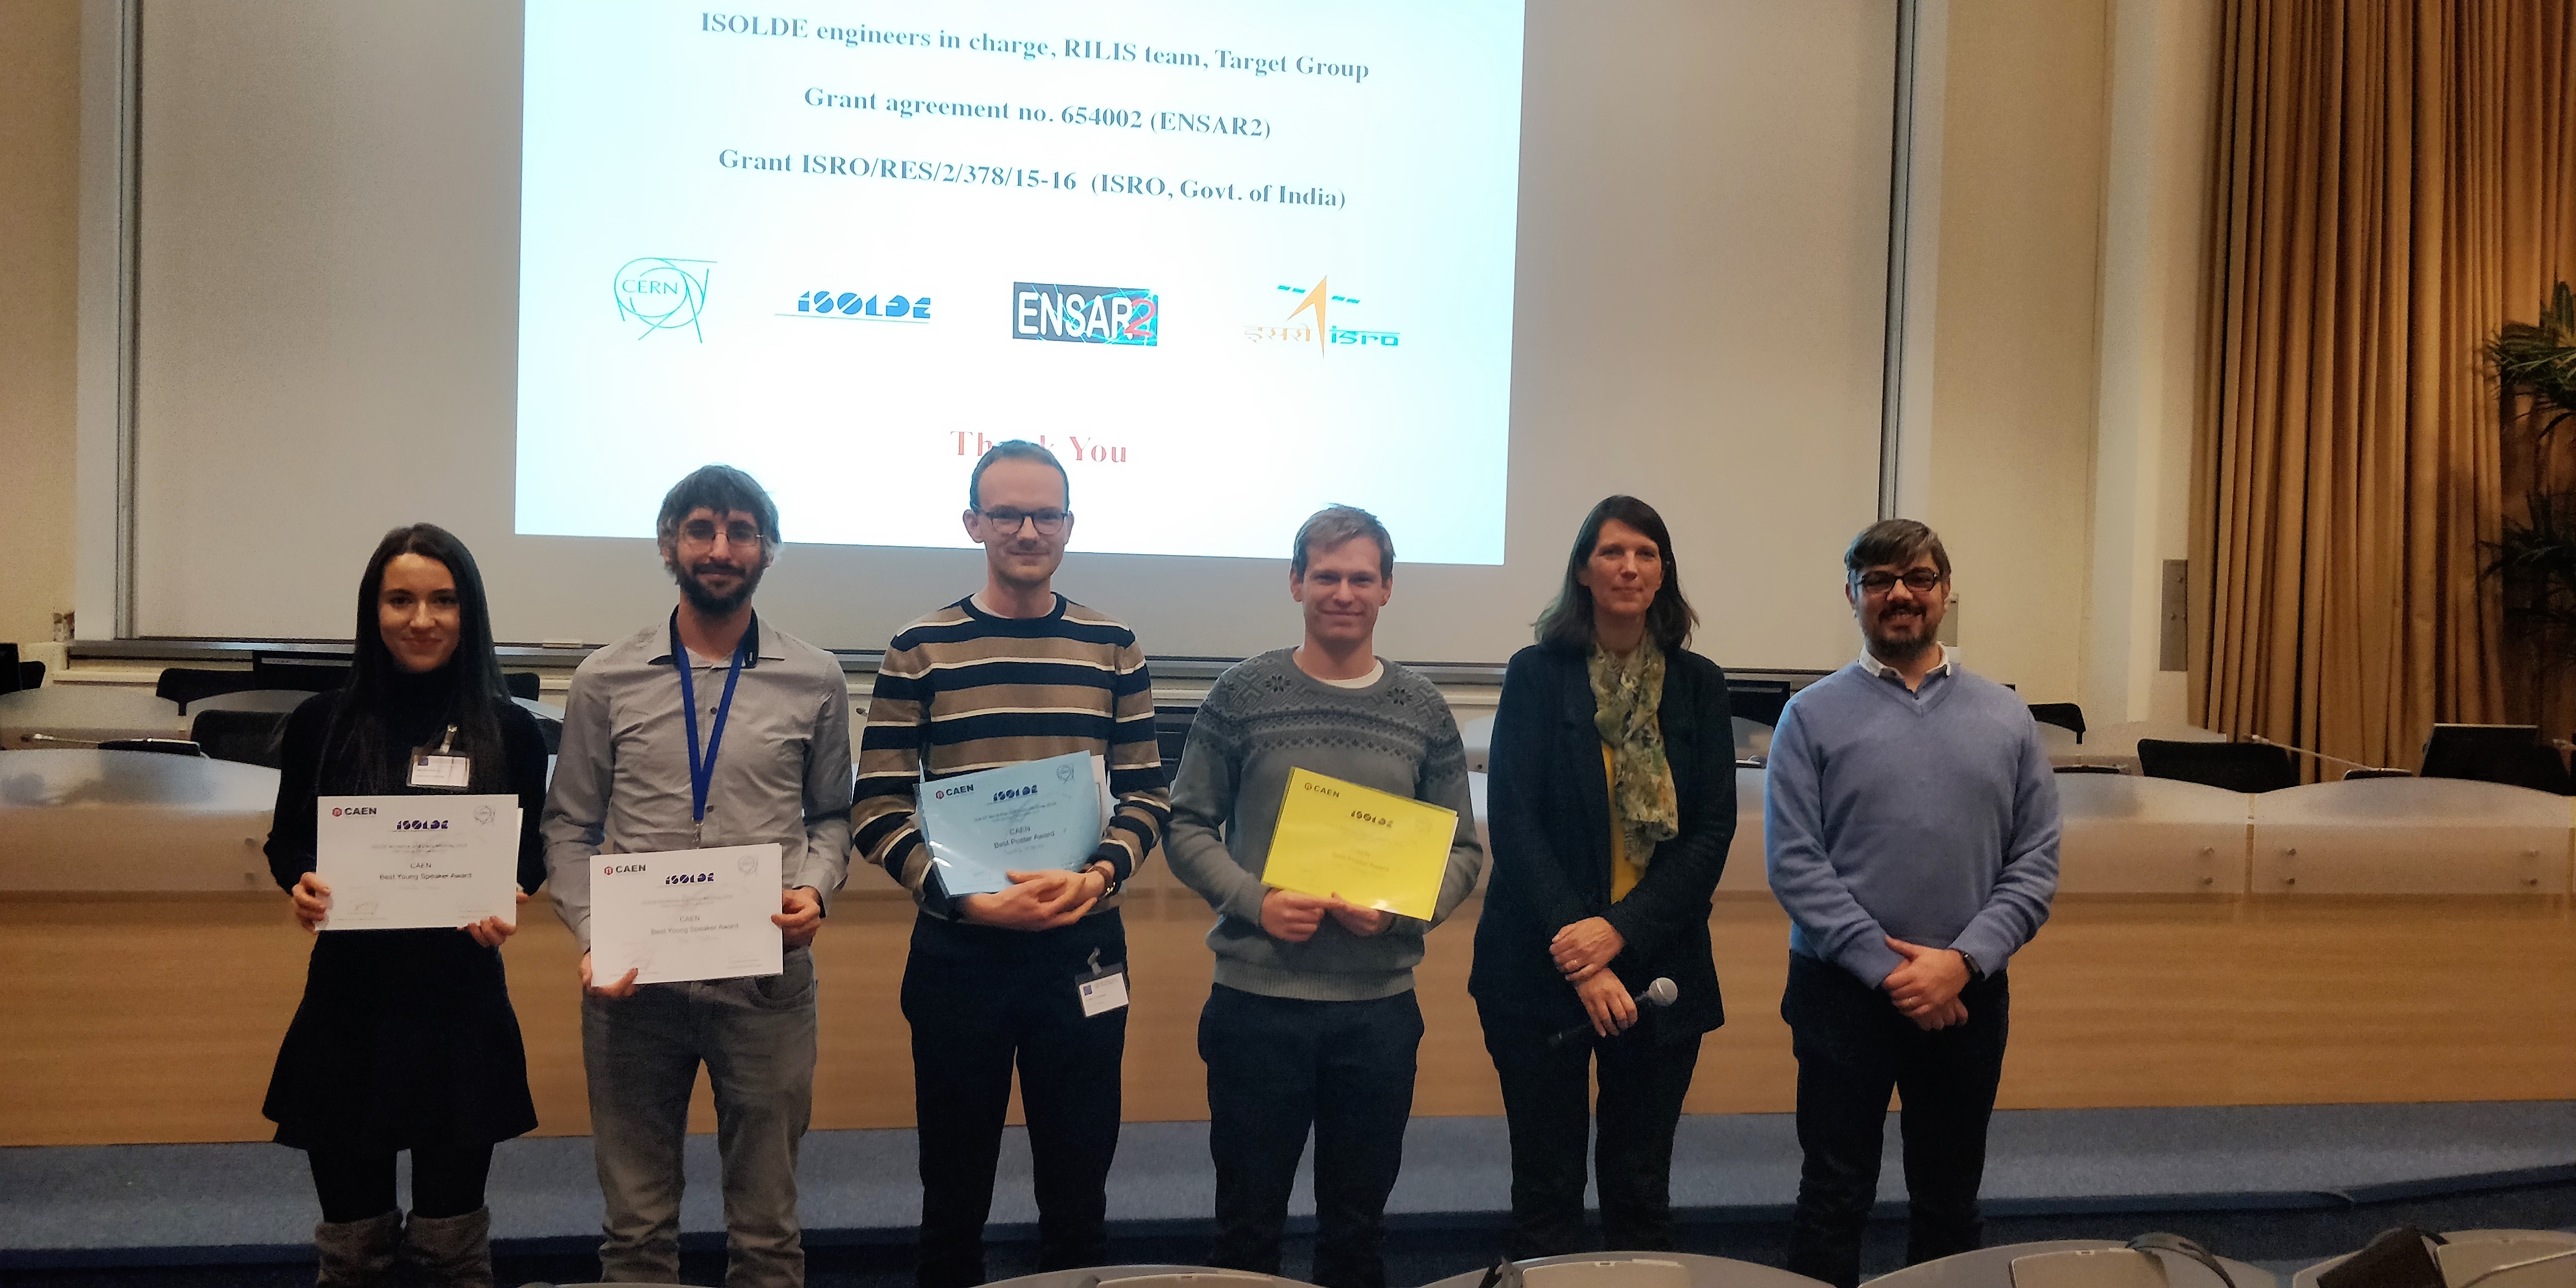 Prize Winners at ISOLDE Workshop 2019